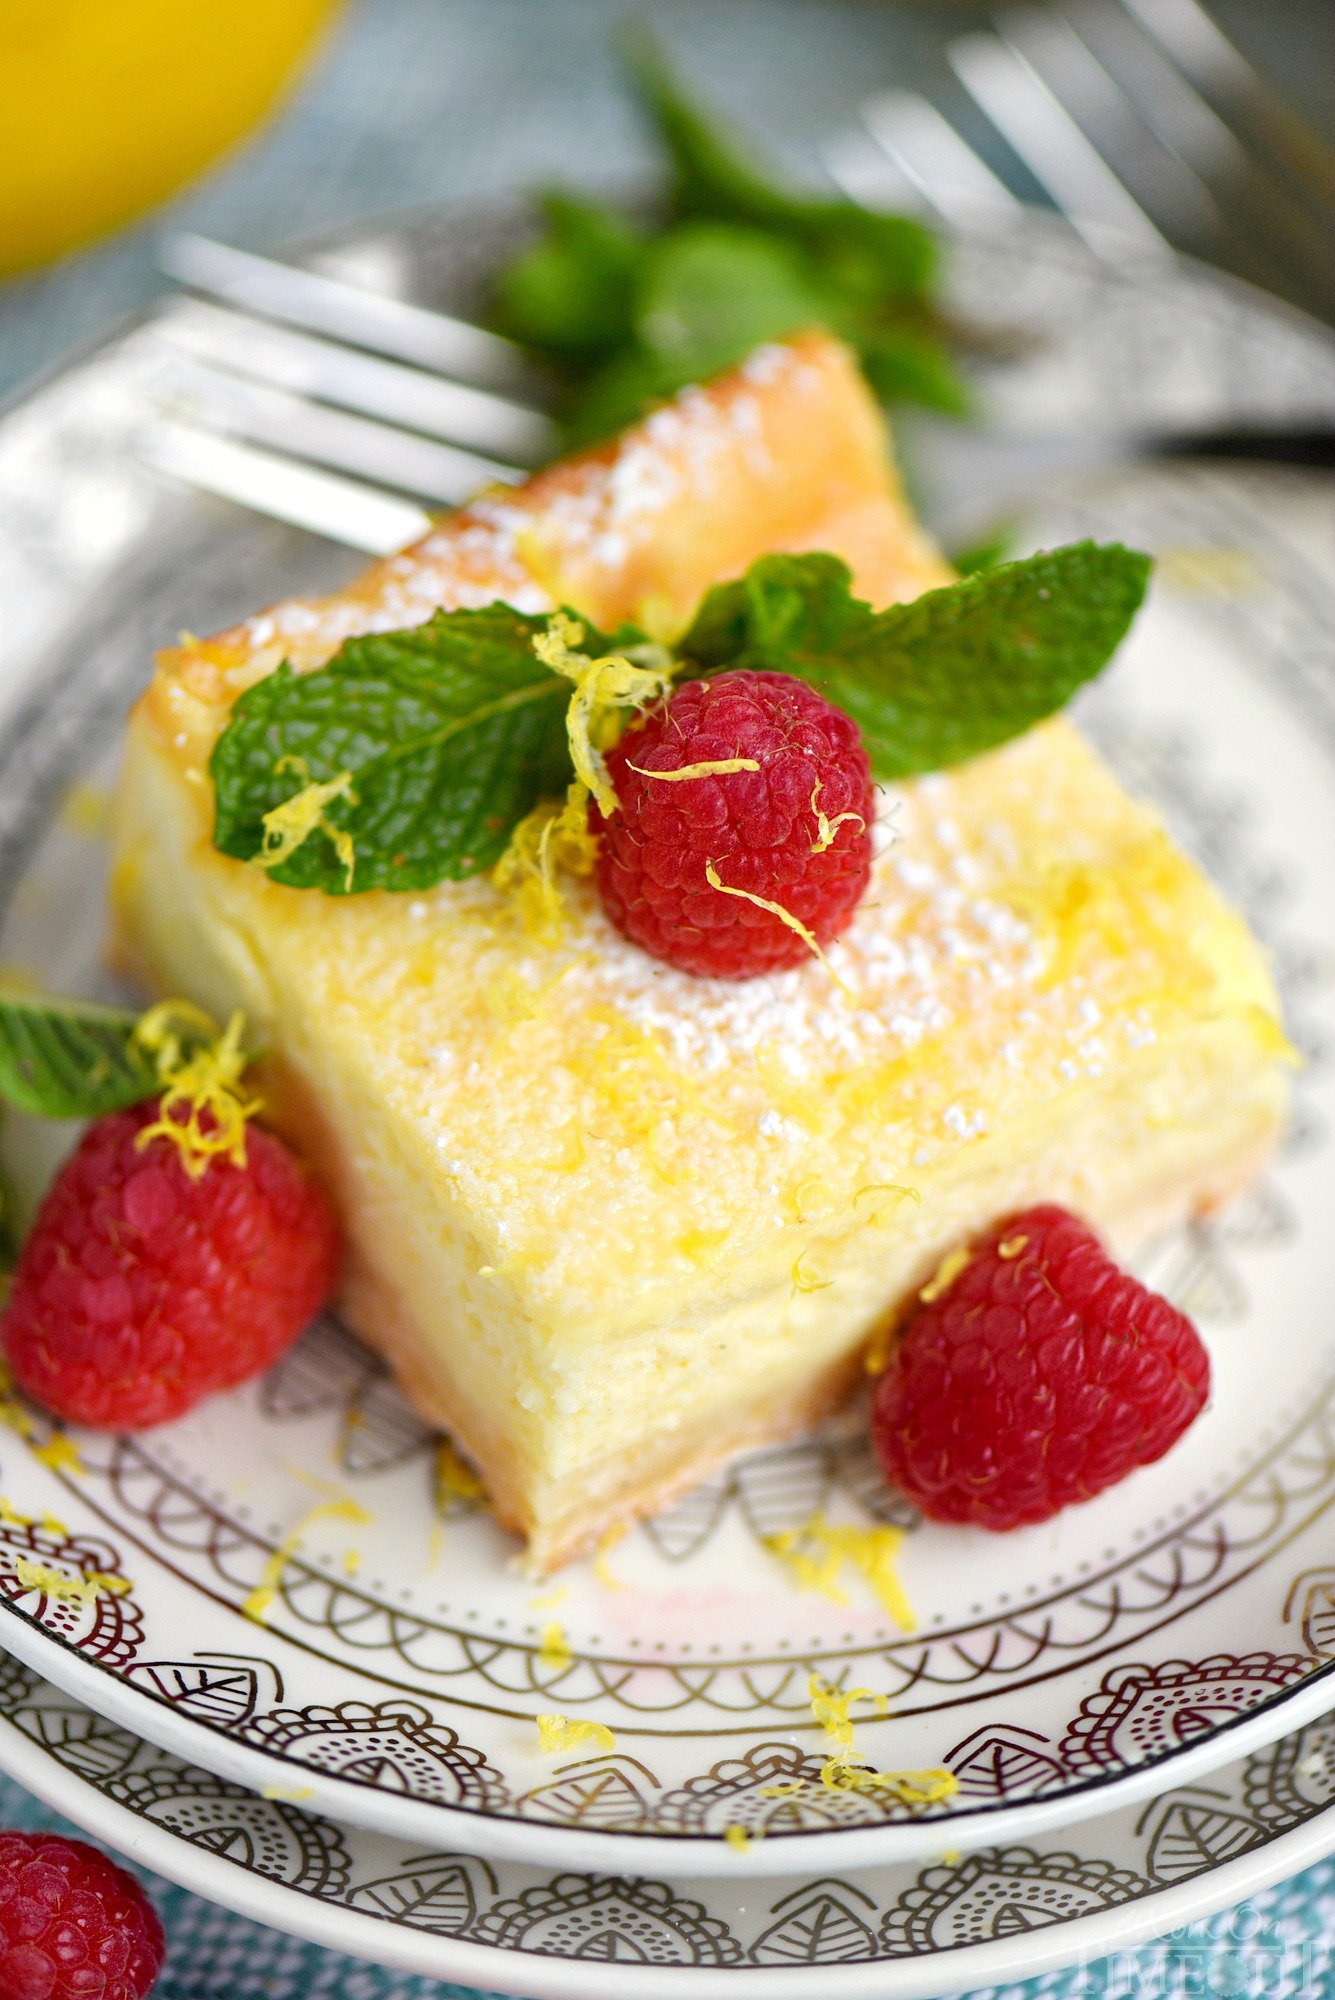 My Aunt Pam's Lemon Cheesecake Bars are made with lots of fresh lemon juice and zest so they're bursting with lemon flavor! Extra creamy, super easy and always a crowd pleaser! Top with powdered sugar, fresh raspberries, and extra lemon zest for a pretty presentation! // Mom On Timeout